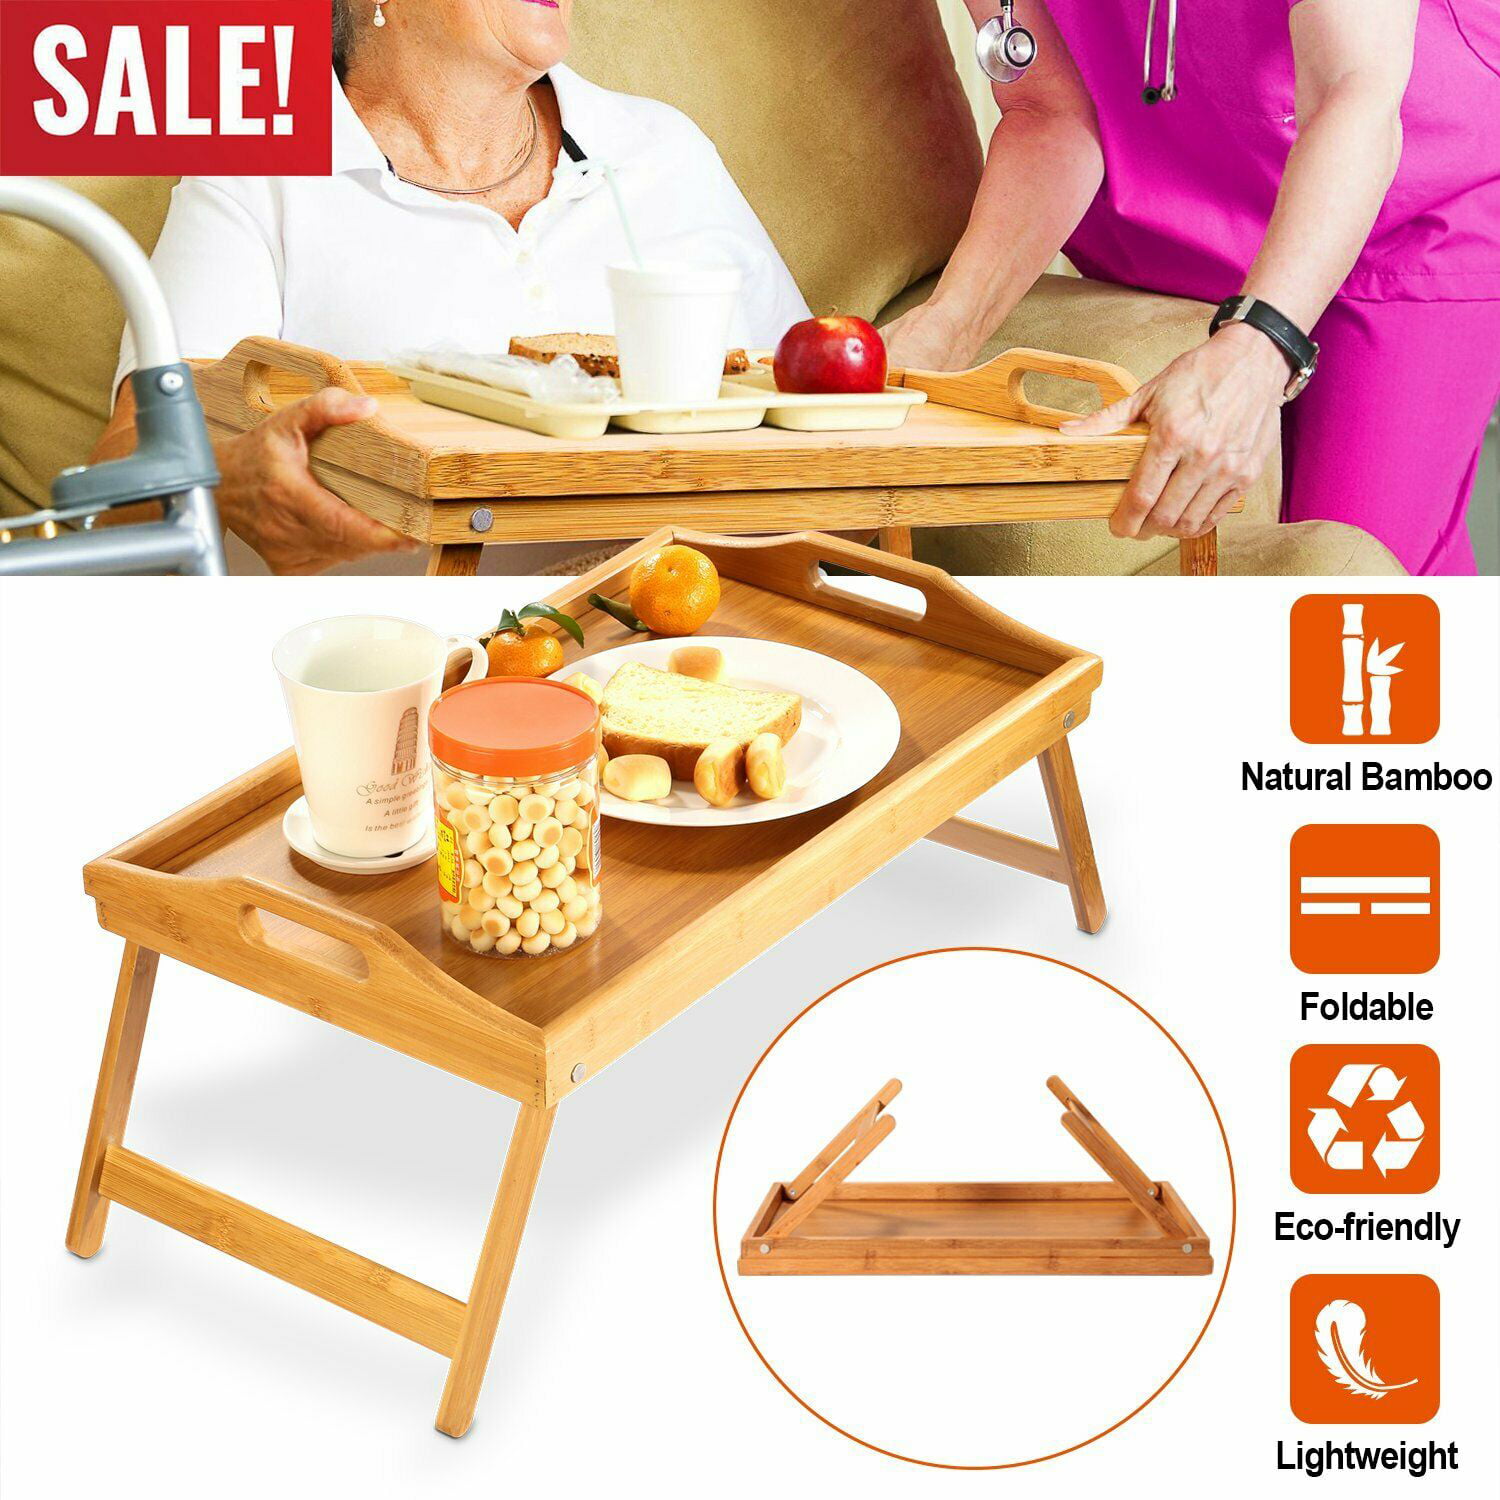 Dowager Natural Bamboo Bed Tray with Folding Legs,Breakfast Tray Great for Breakfast in Bed or Eating Tray with Handles,Lightweight Portable Laptop Desk Serving Tray for Home/Office/Travel 